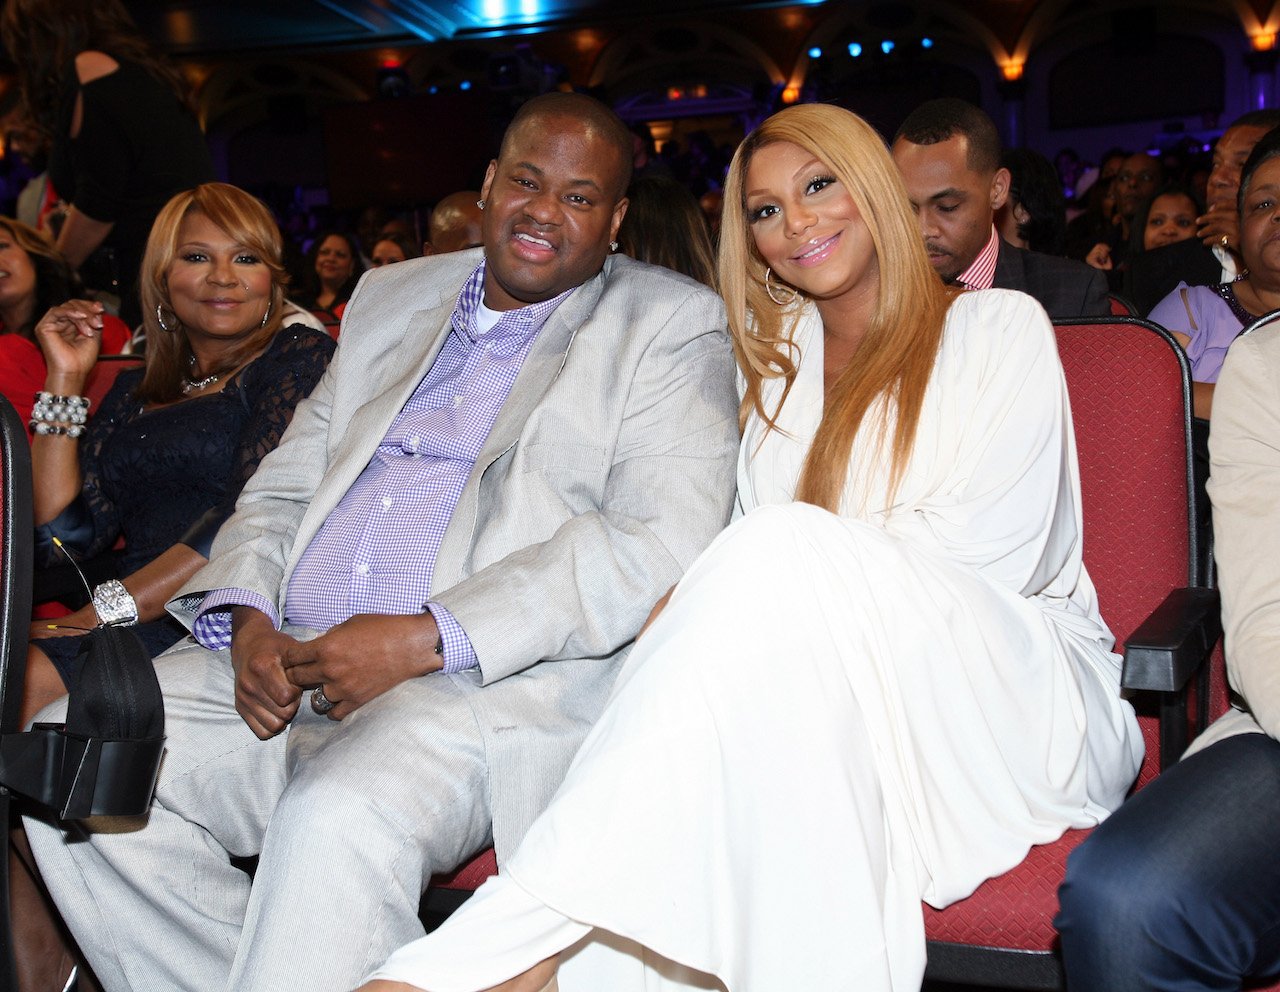 Vincent Herbert and Tamar Braxton at BET Celebration of Gospel; Herbert and Braxton recently reunited on stage